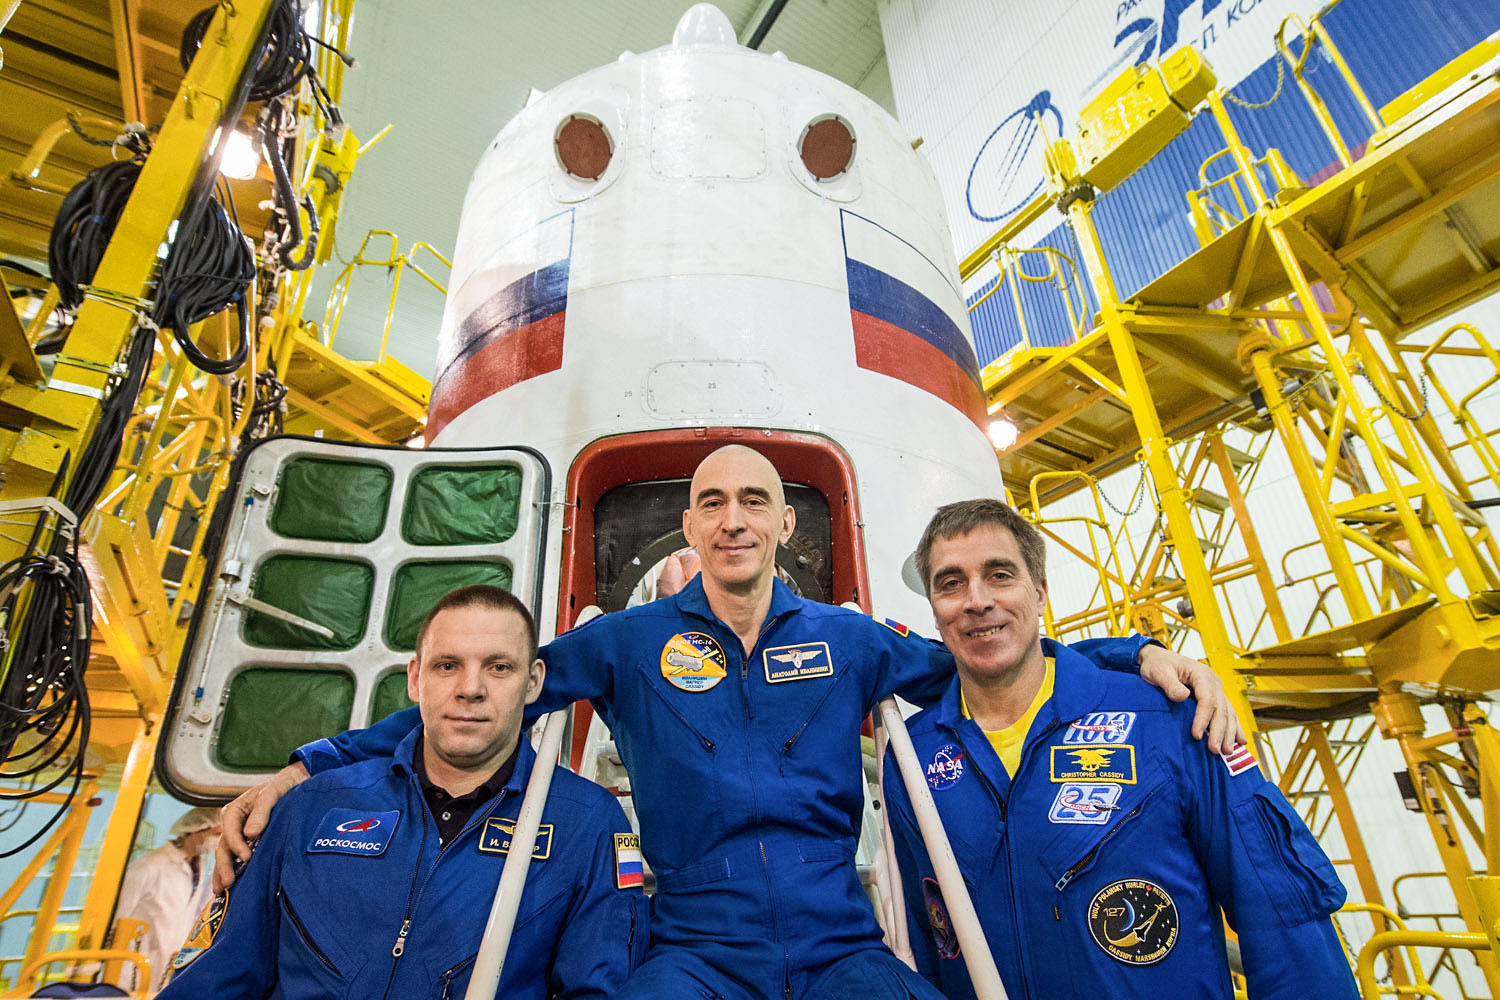 Expedition 63 crew members Ivan Vagner (left) and Anatoly Ivanishin (center) of Roscosmos and NASA astronaut Chris Cassidy 